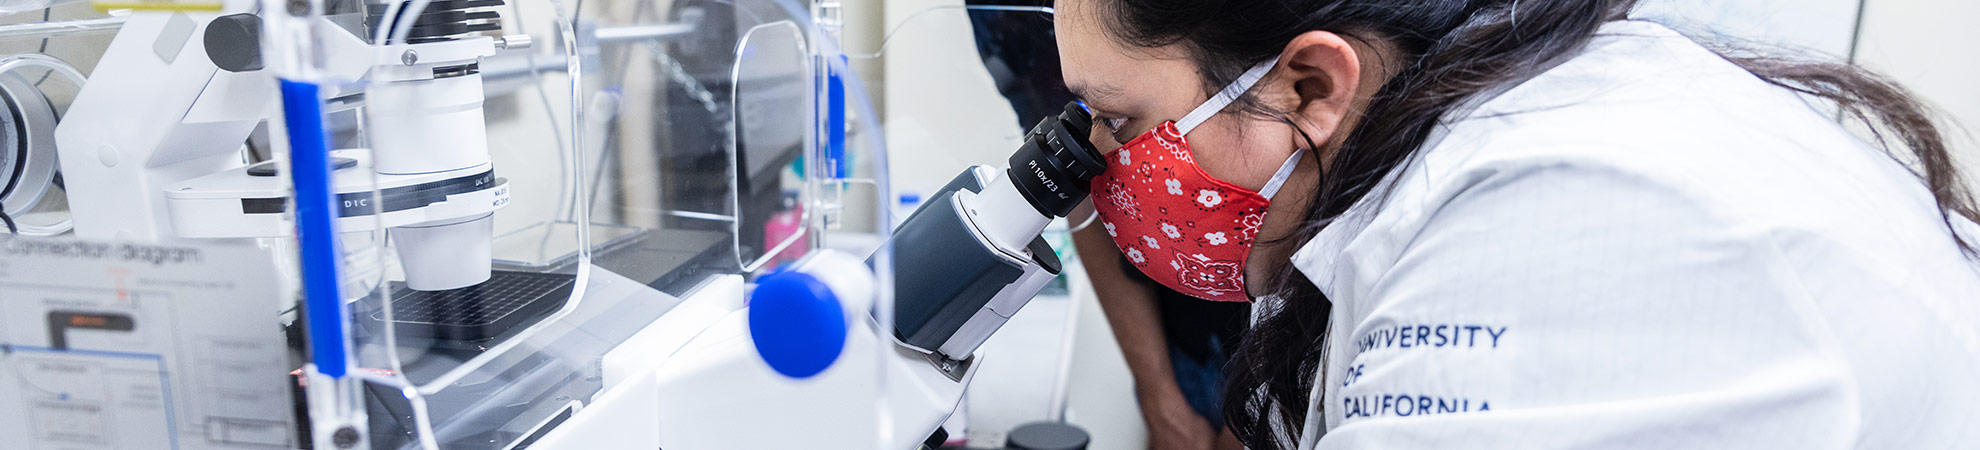 female student looking into a microscope in a medical setting